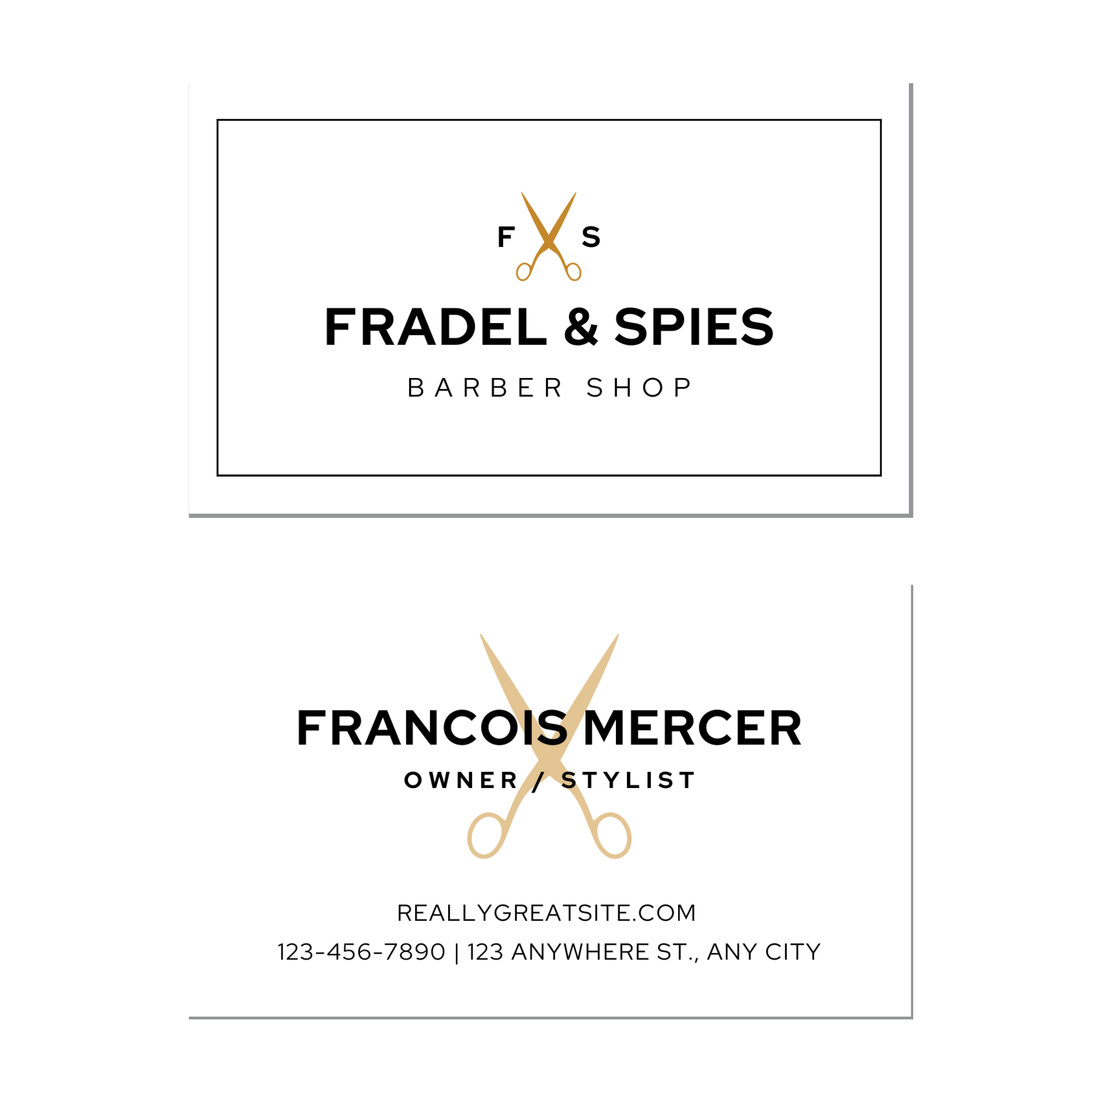 White Gold Barber - Business Card Template - Two Side